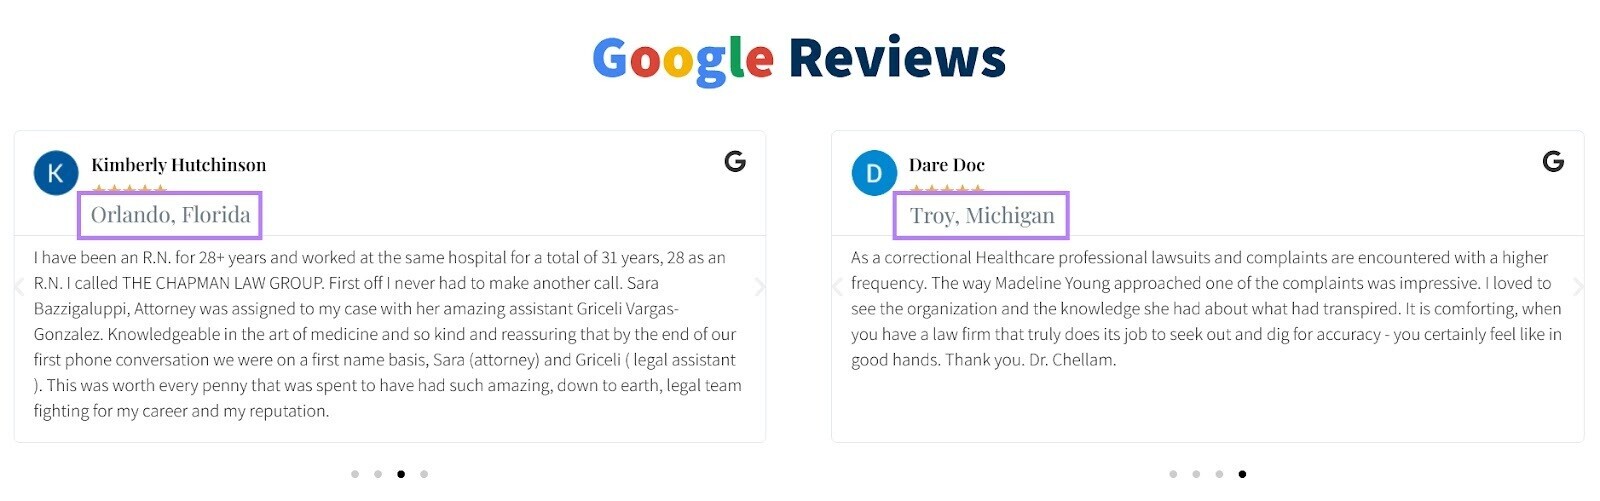 "Google reviews" section on Chapman Law Group's customer reviews and testimonials